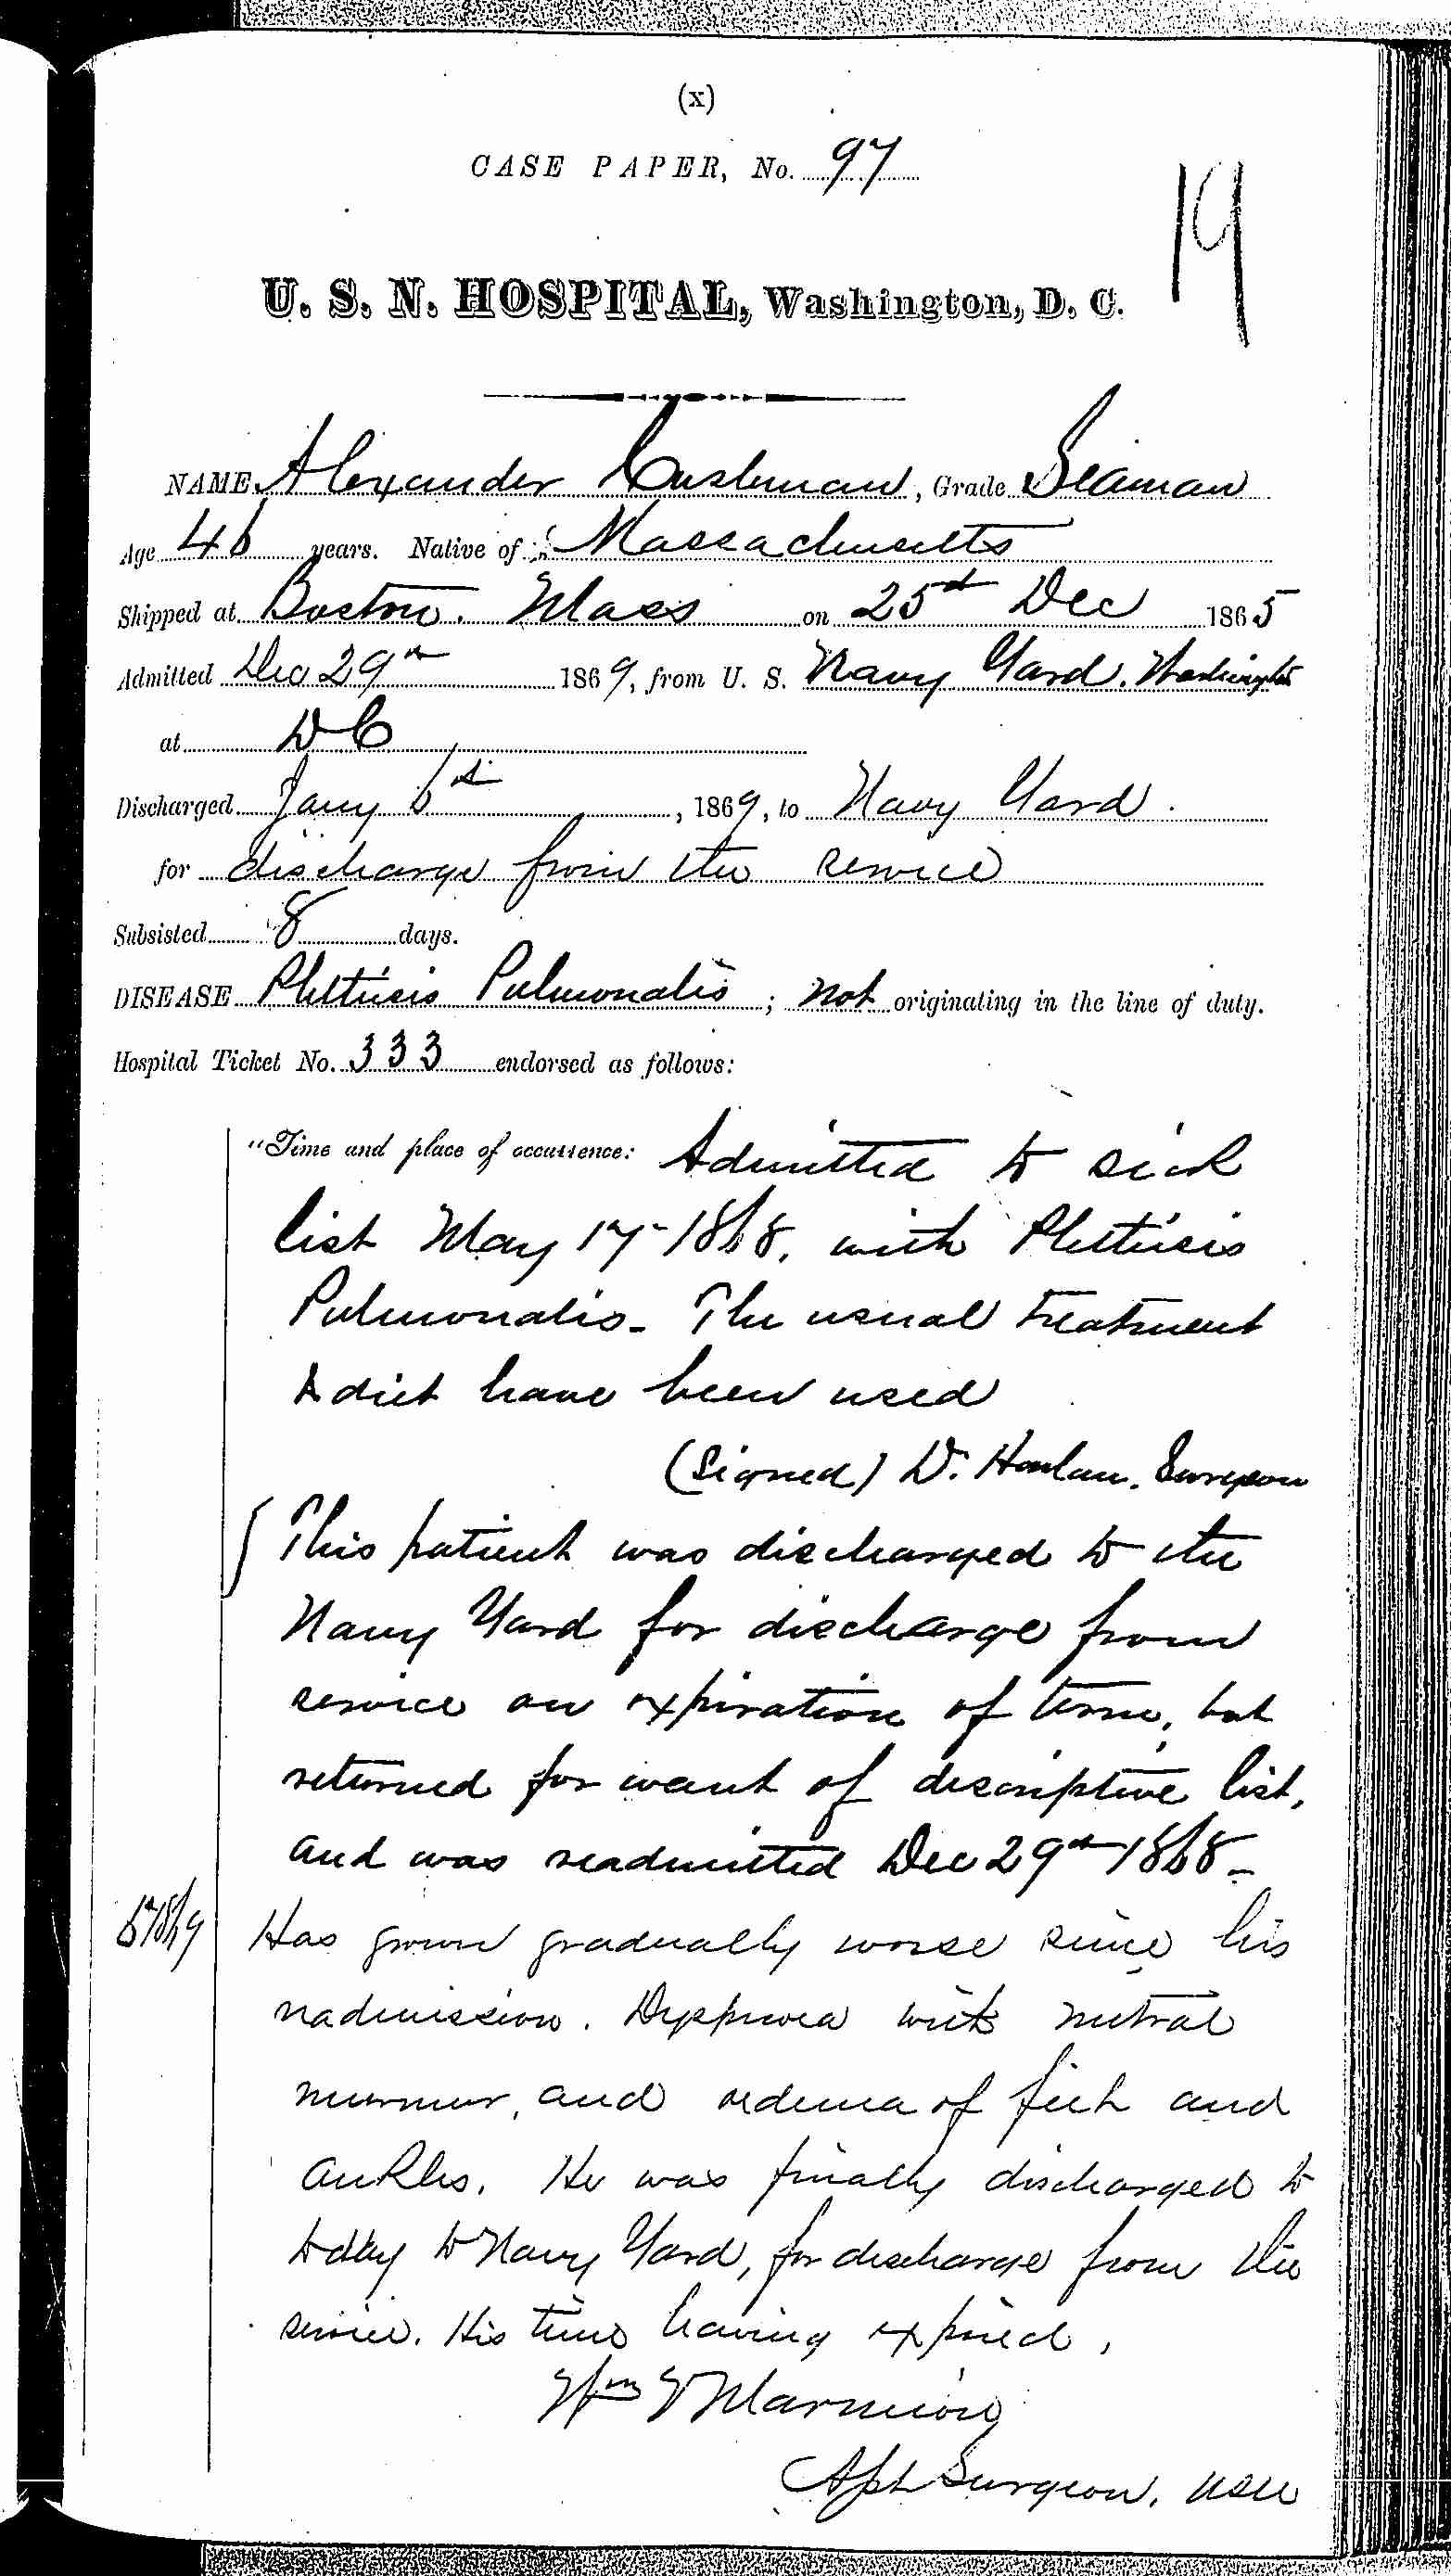 Entry for Charles Wyatt (page 1 of 1) in the log Hospital Tickets and Case Papers - Naval Hospital - Washington, D.C. - 1868-69